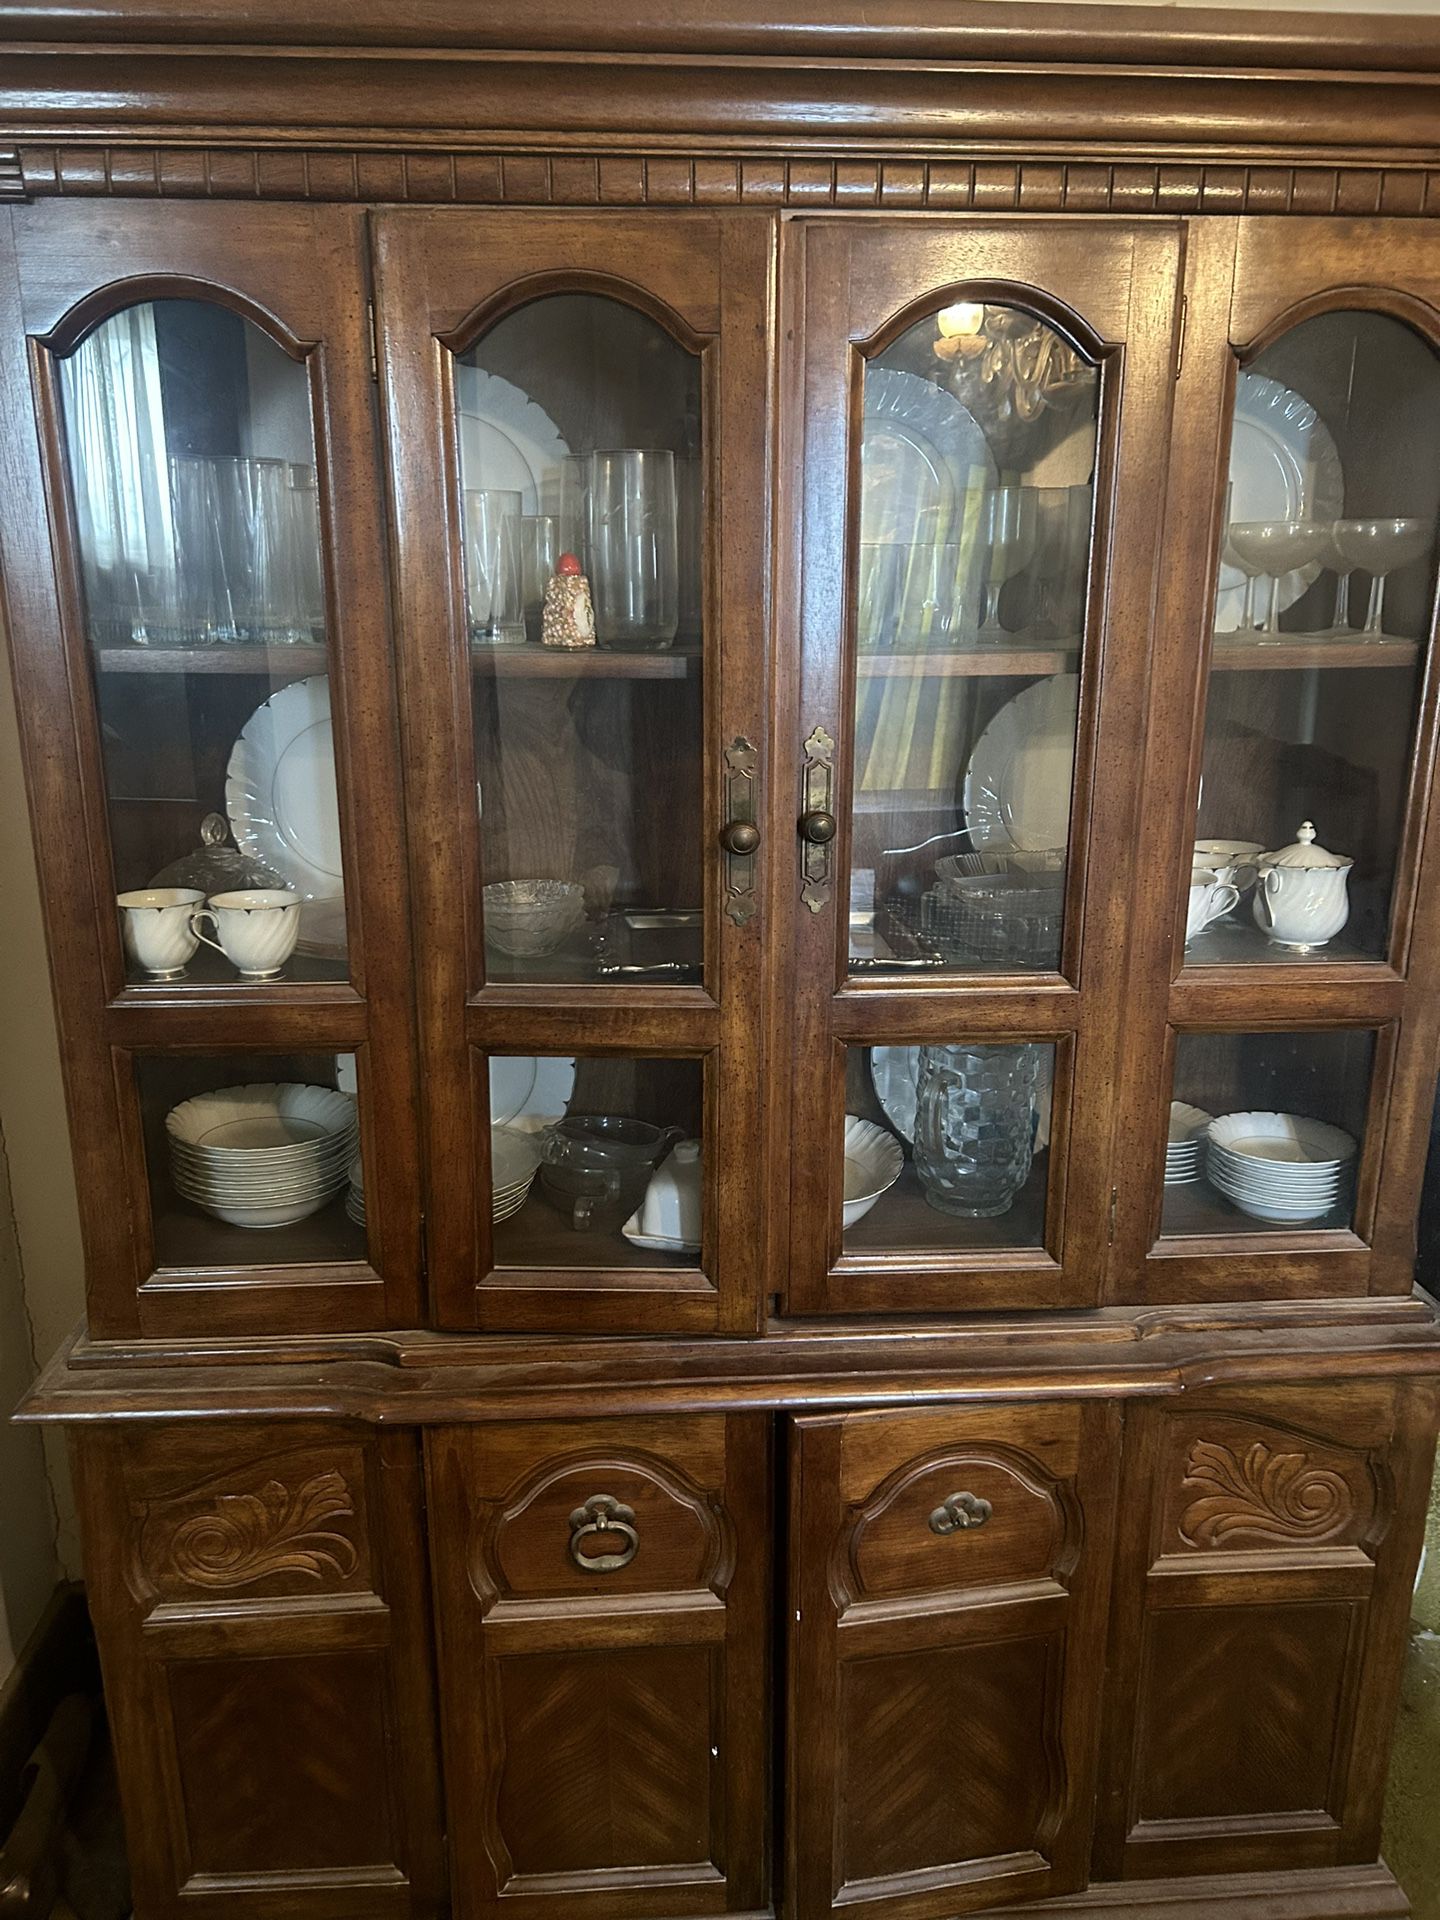 China Cabinet -China Not Included